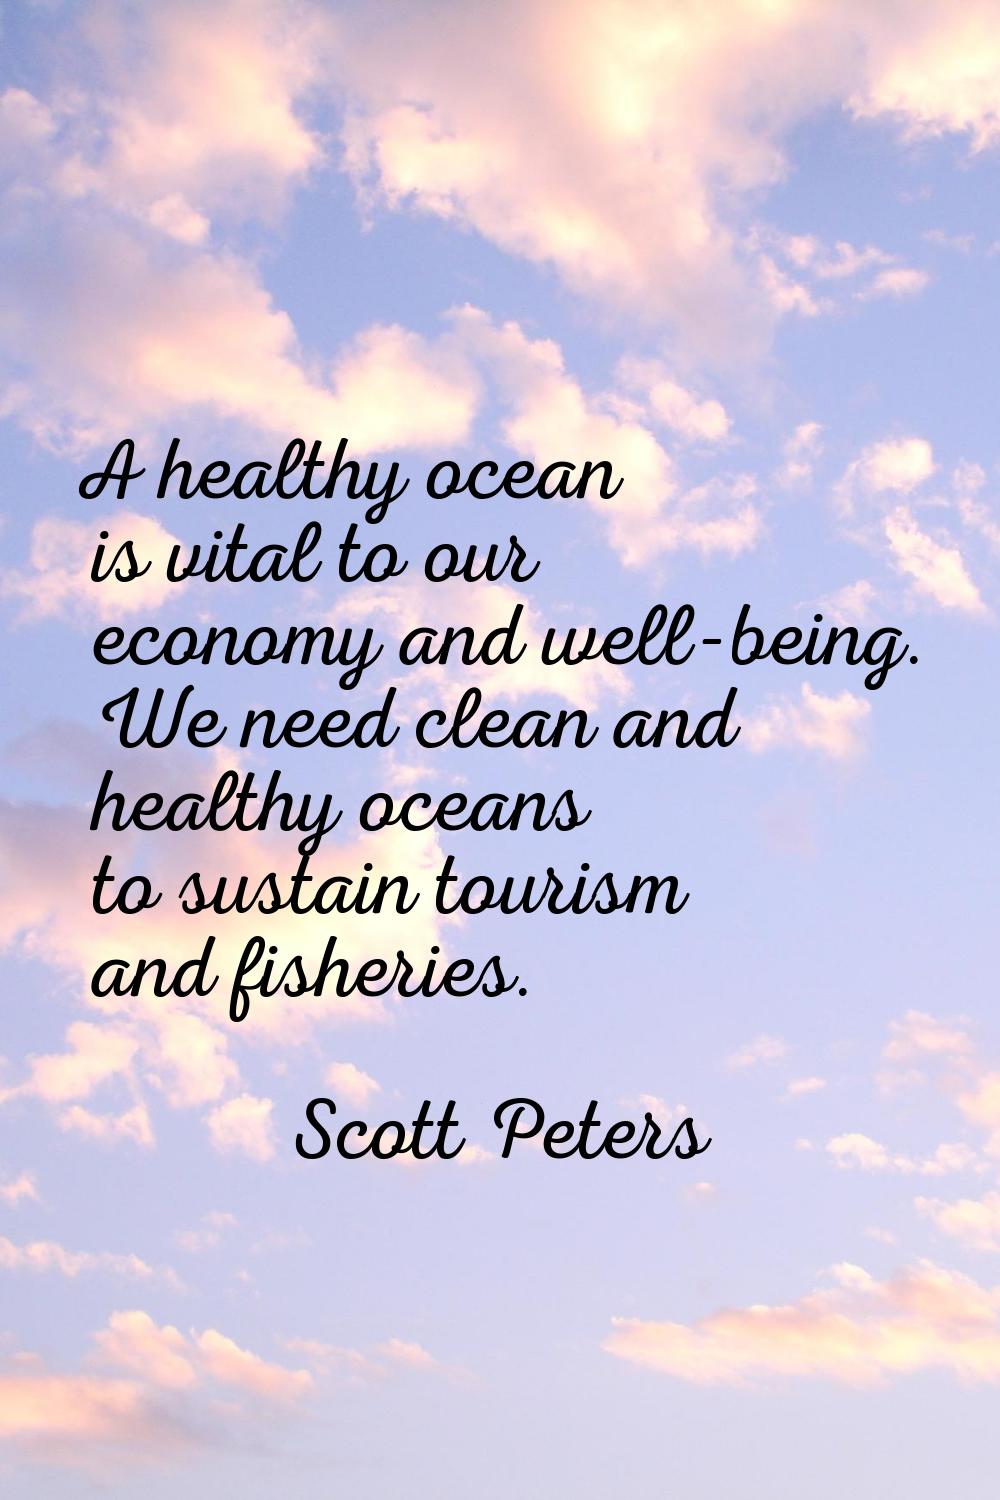 A healthy ocean is vital to our economy and well-being. We need clean and healthy oceans to sustain